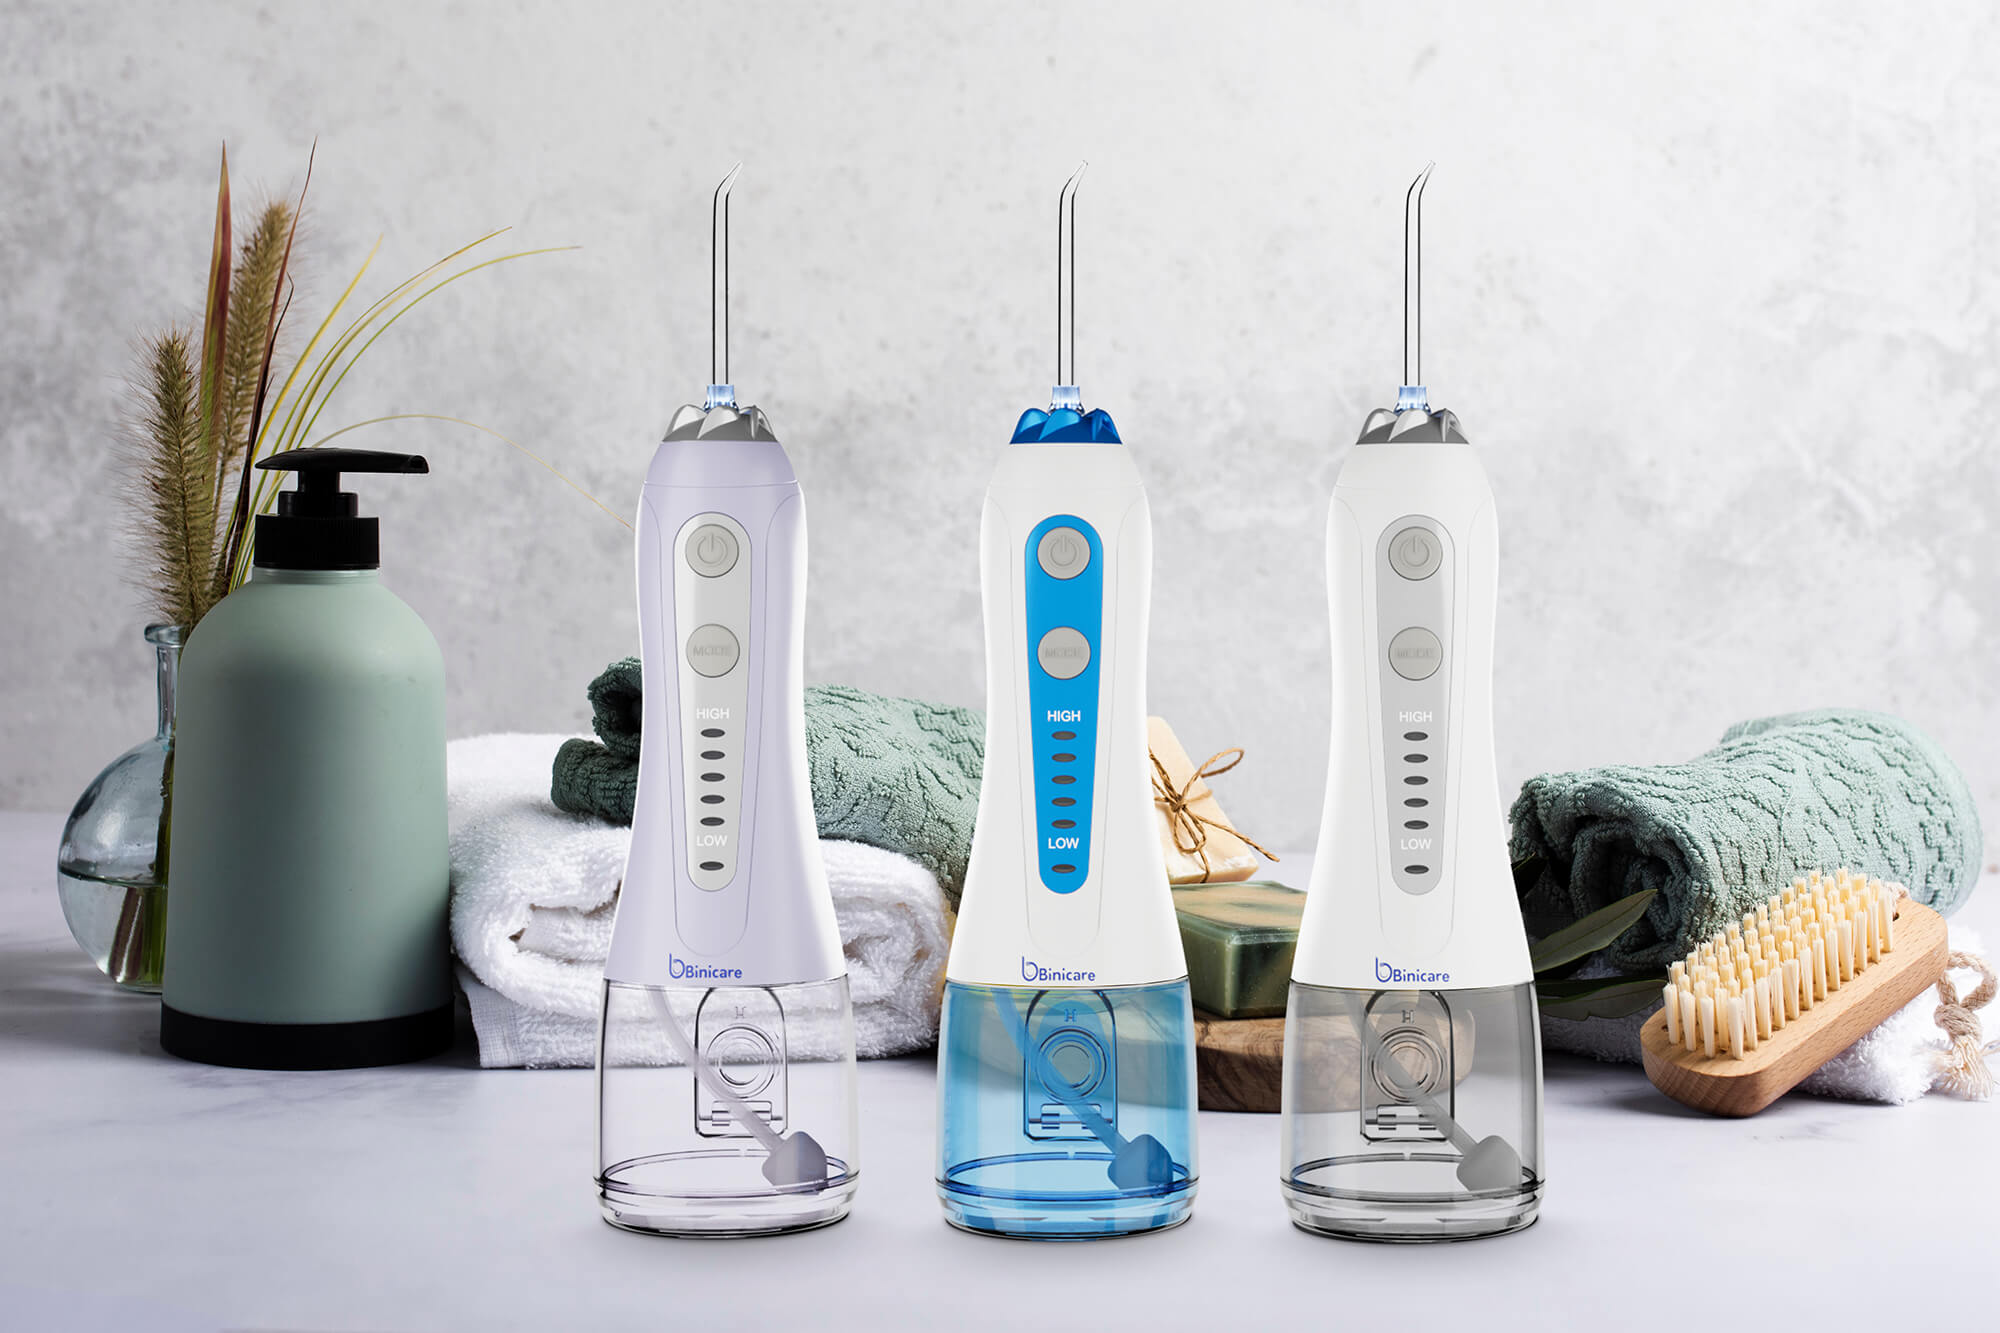 This Brand Provide an Account of Water Flosser for College Freshmen